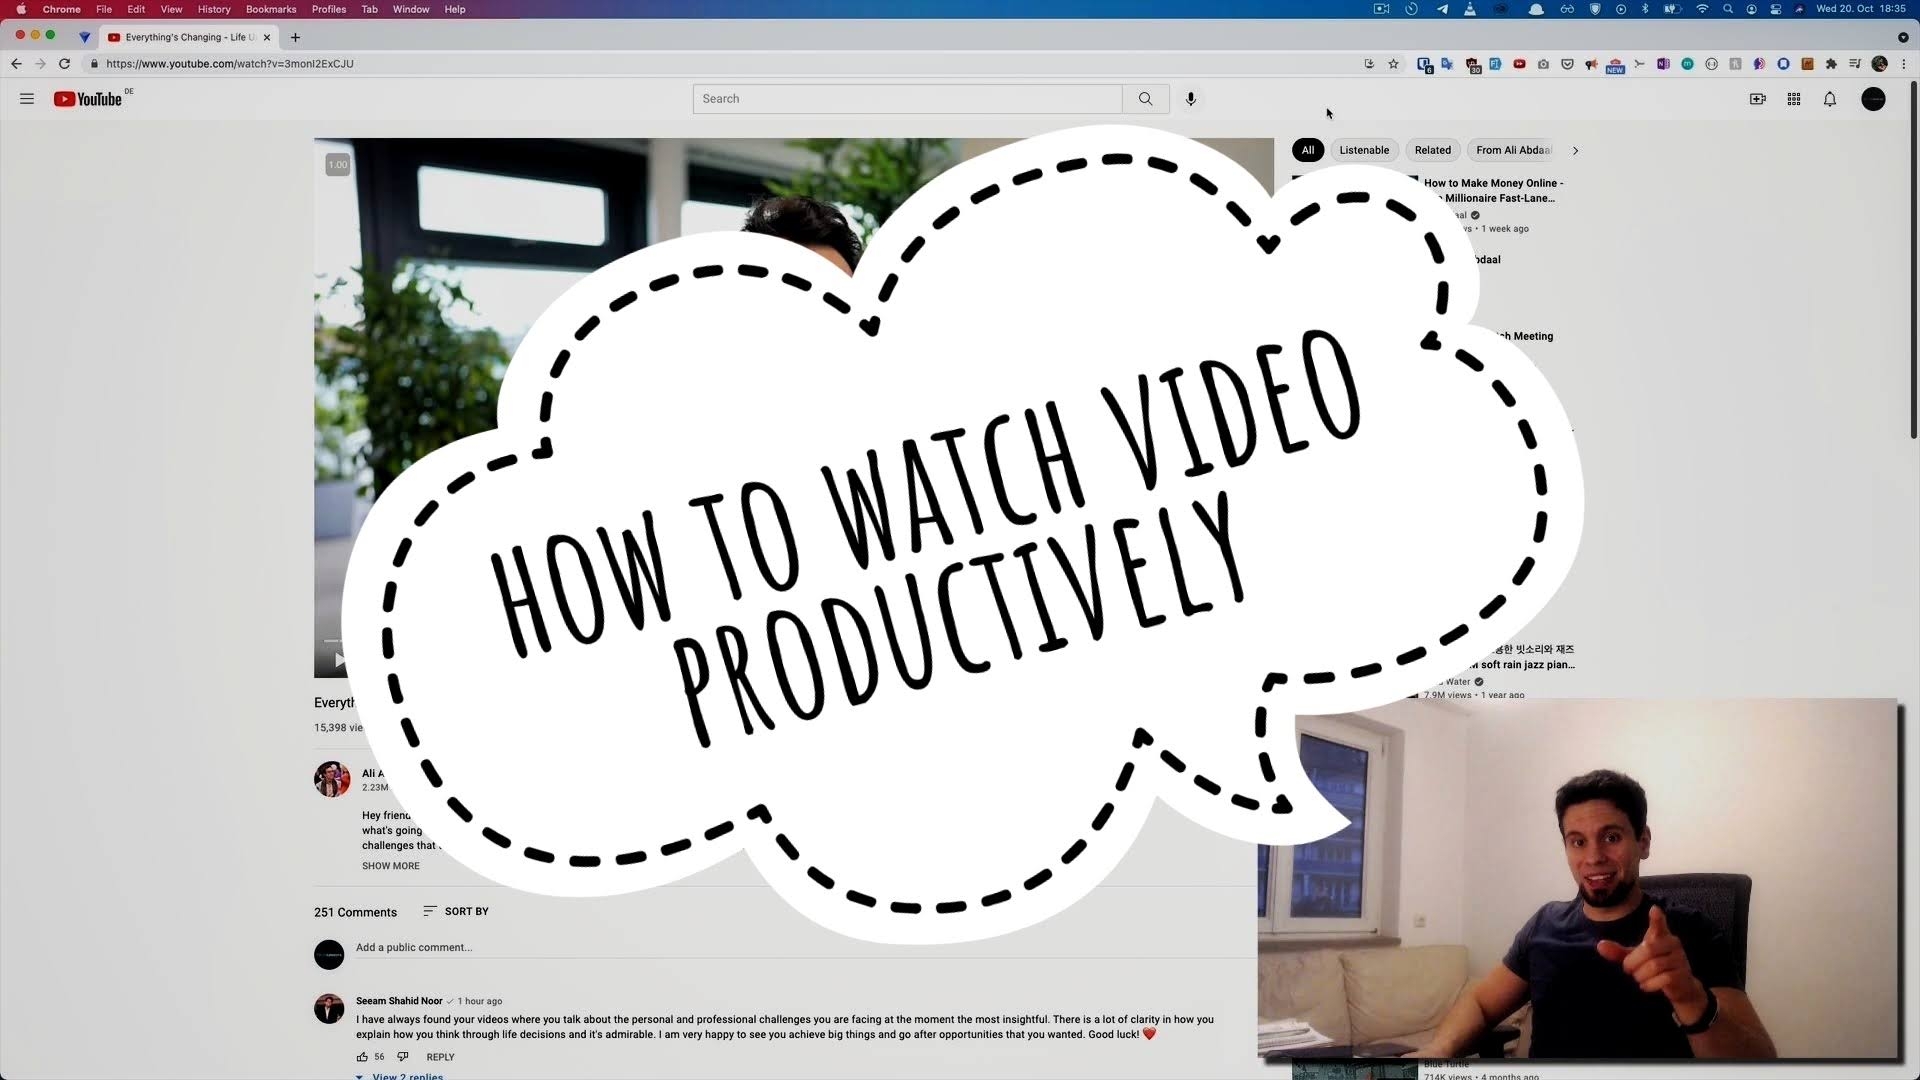 How to Productively Watch Videos cover image